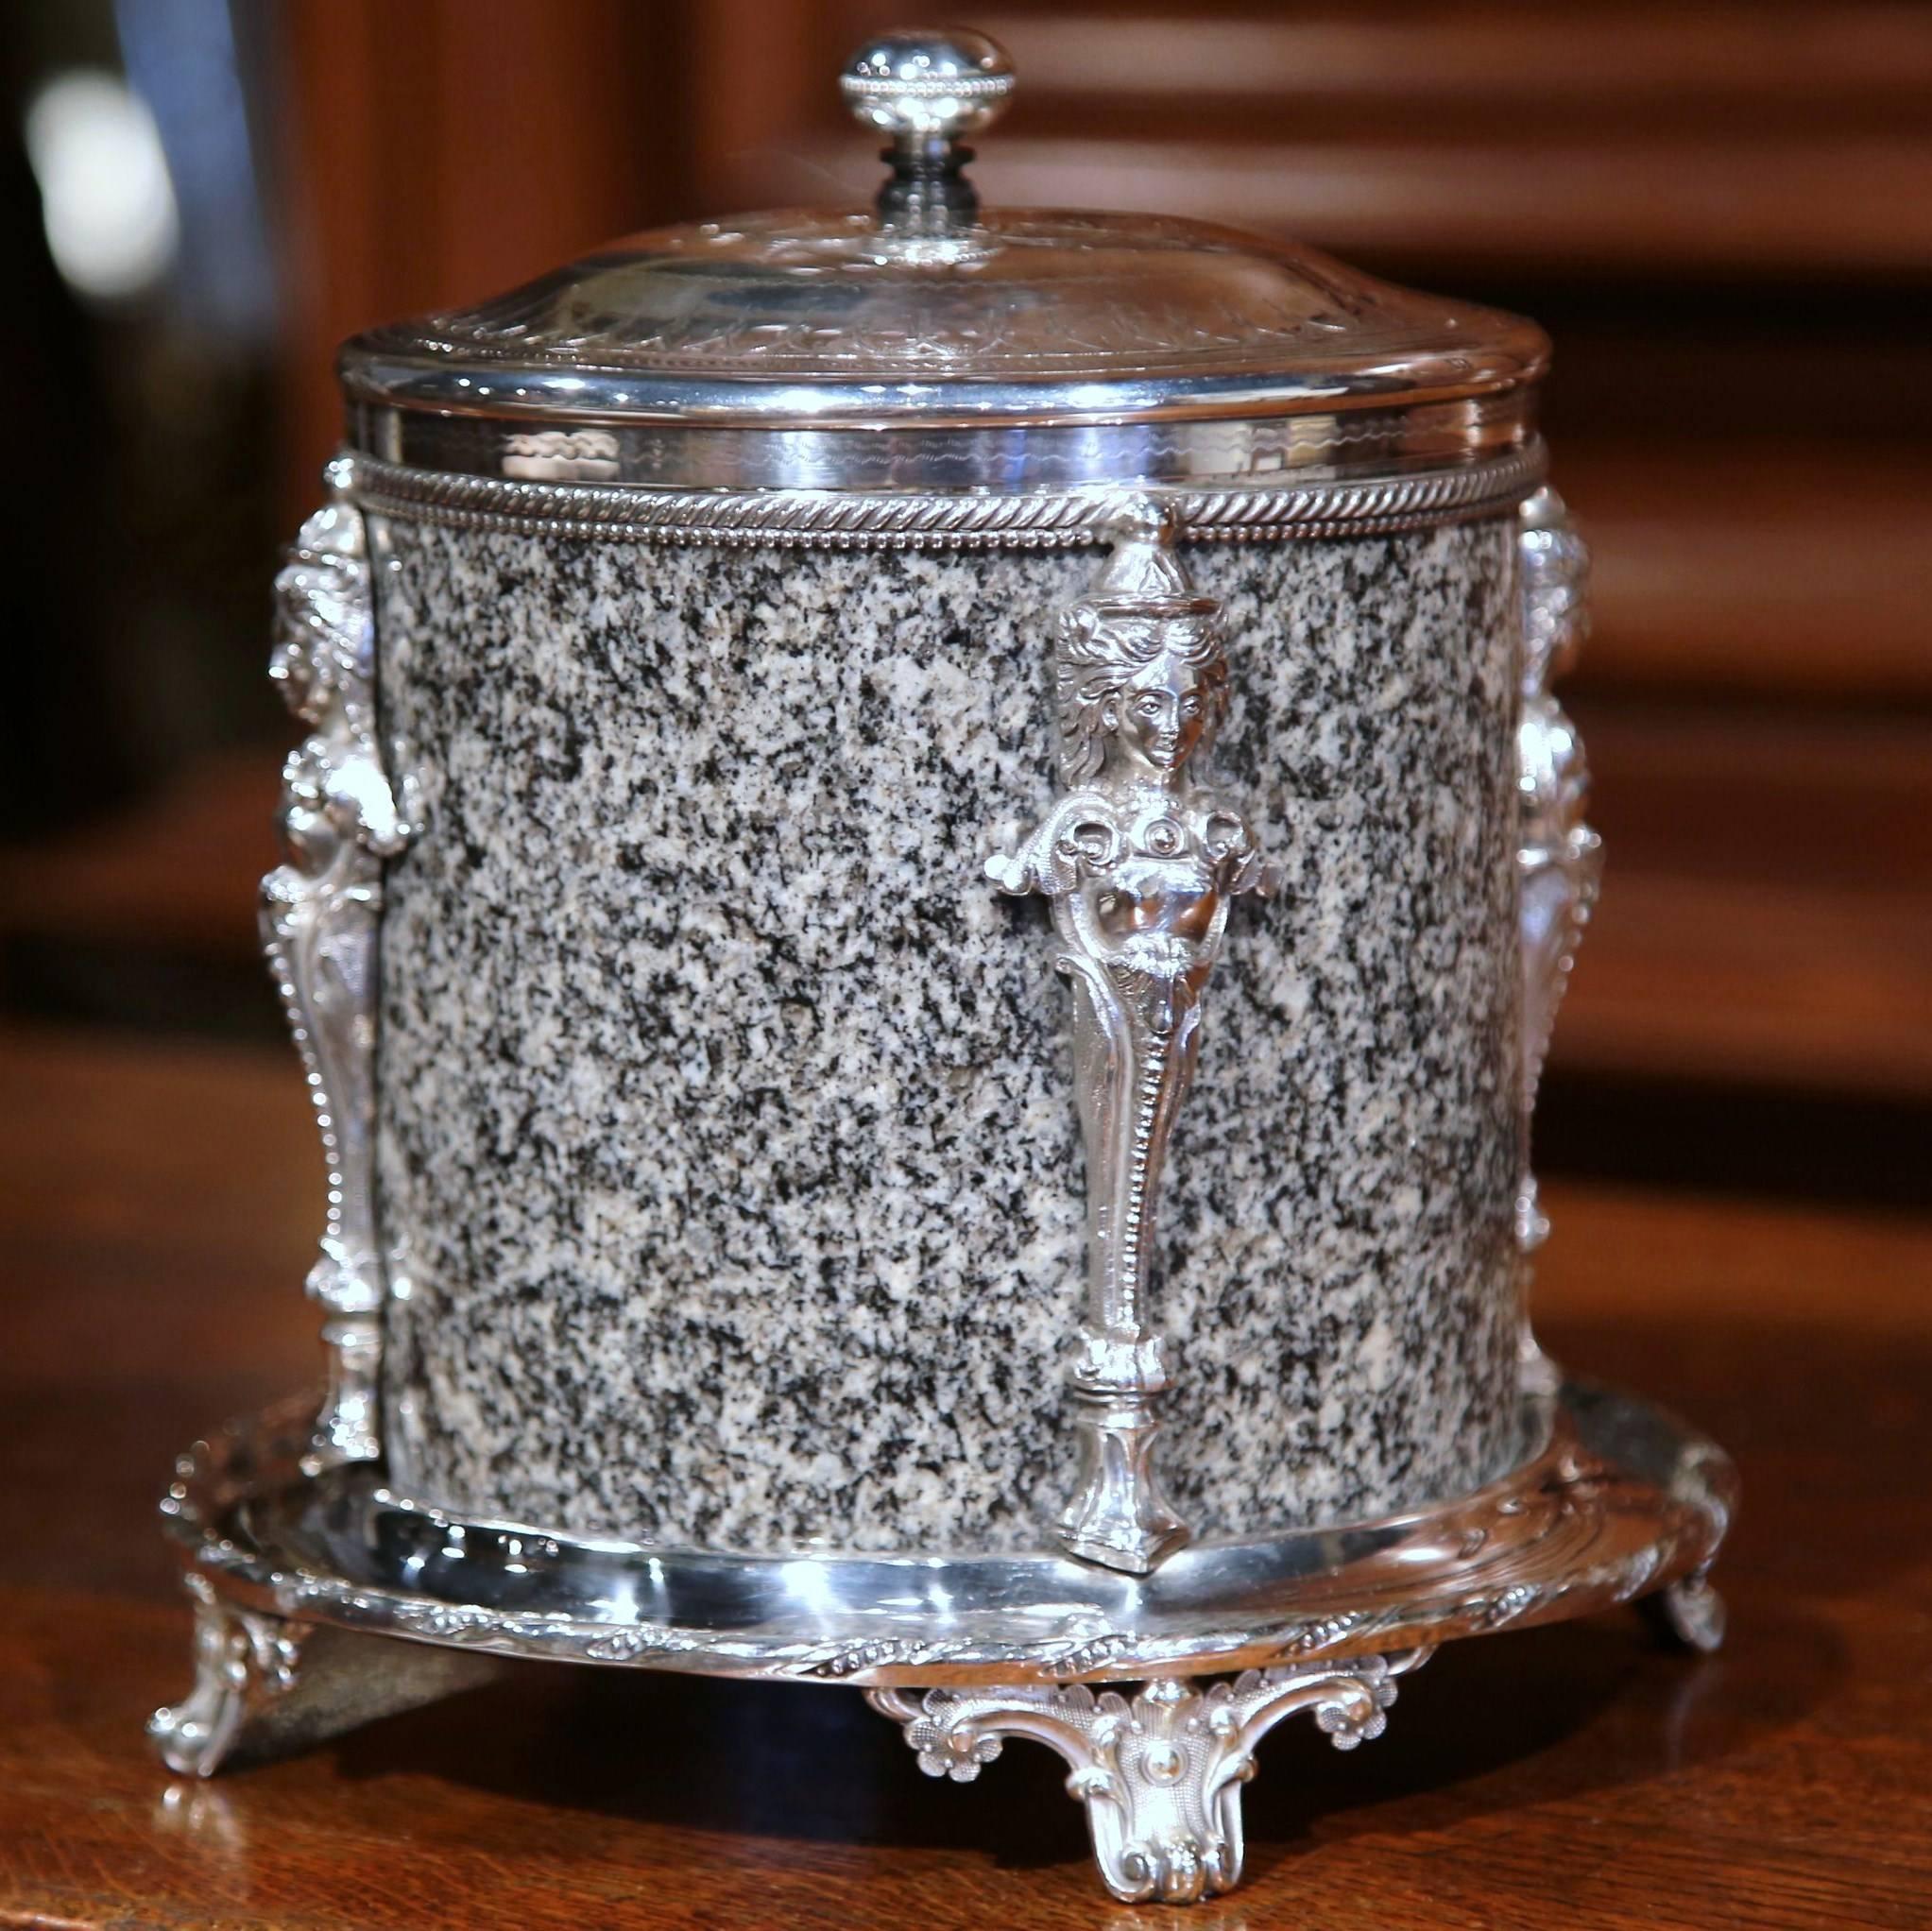 This elegant, antique biscuit box was crafted by Roberts & Bell, in Sheffield, England, circa 1864-1920. Cylindrical in form, the granite body of the container is topped with a silver plated, hinged cover finely chased, four scrolled feet at the